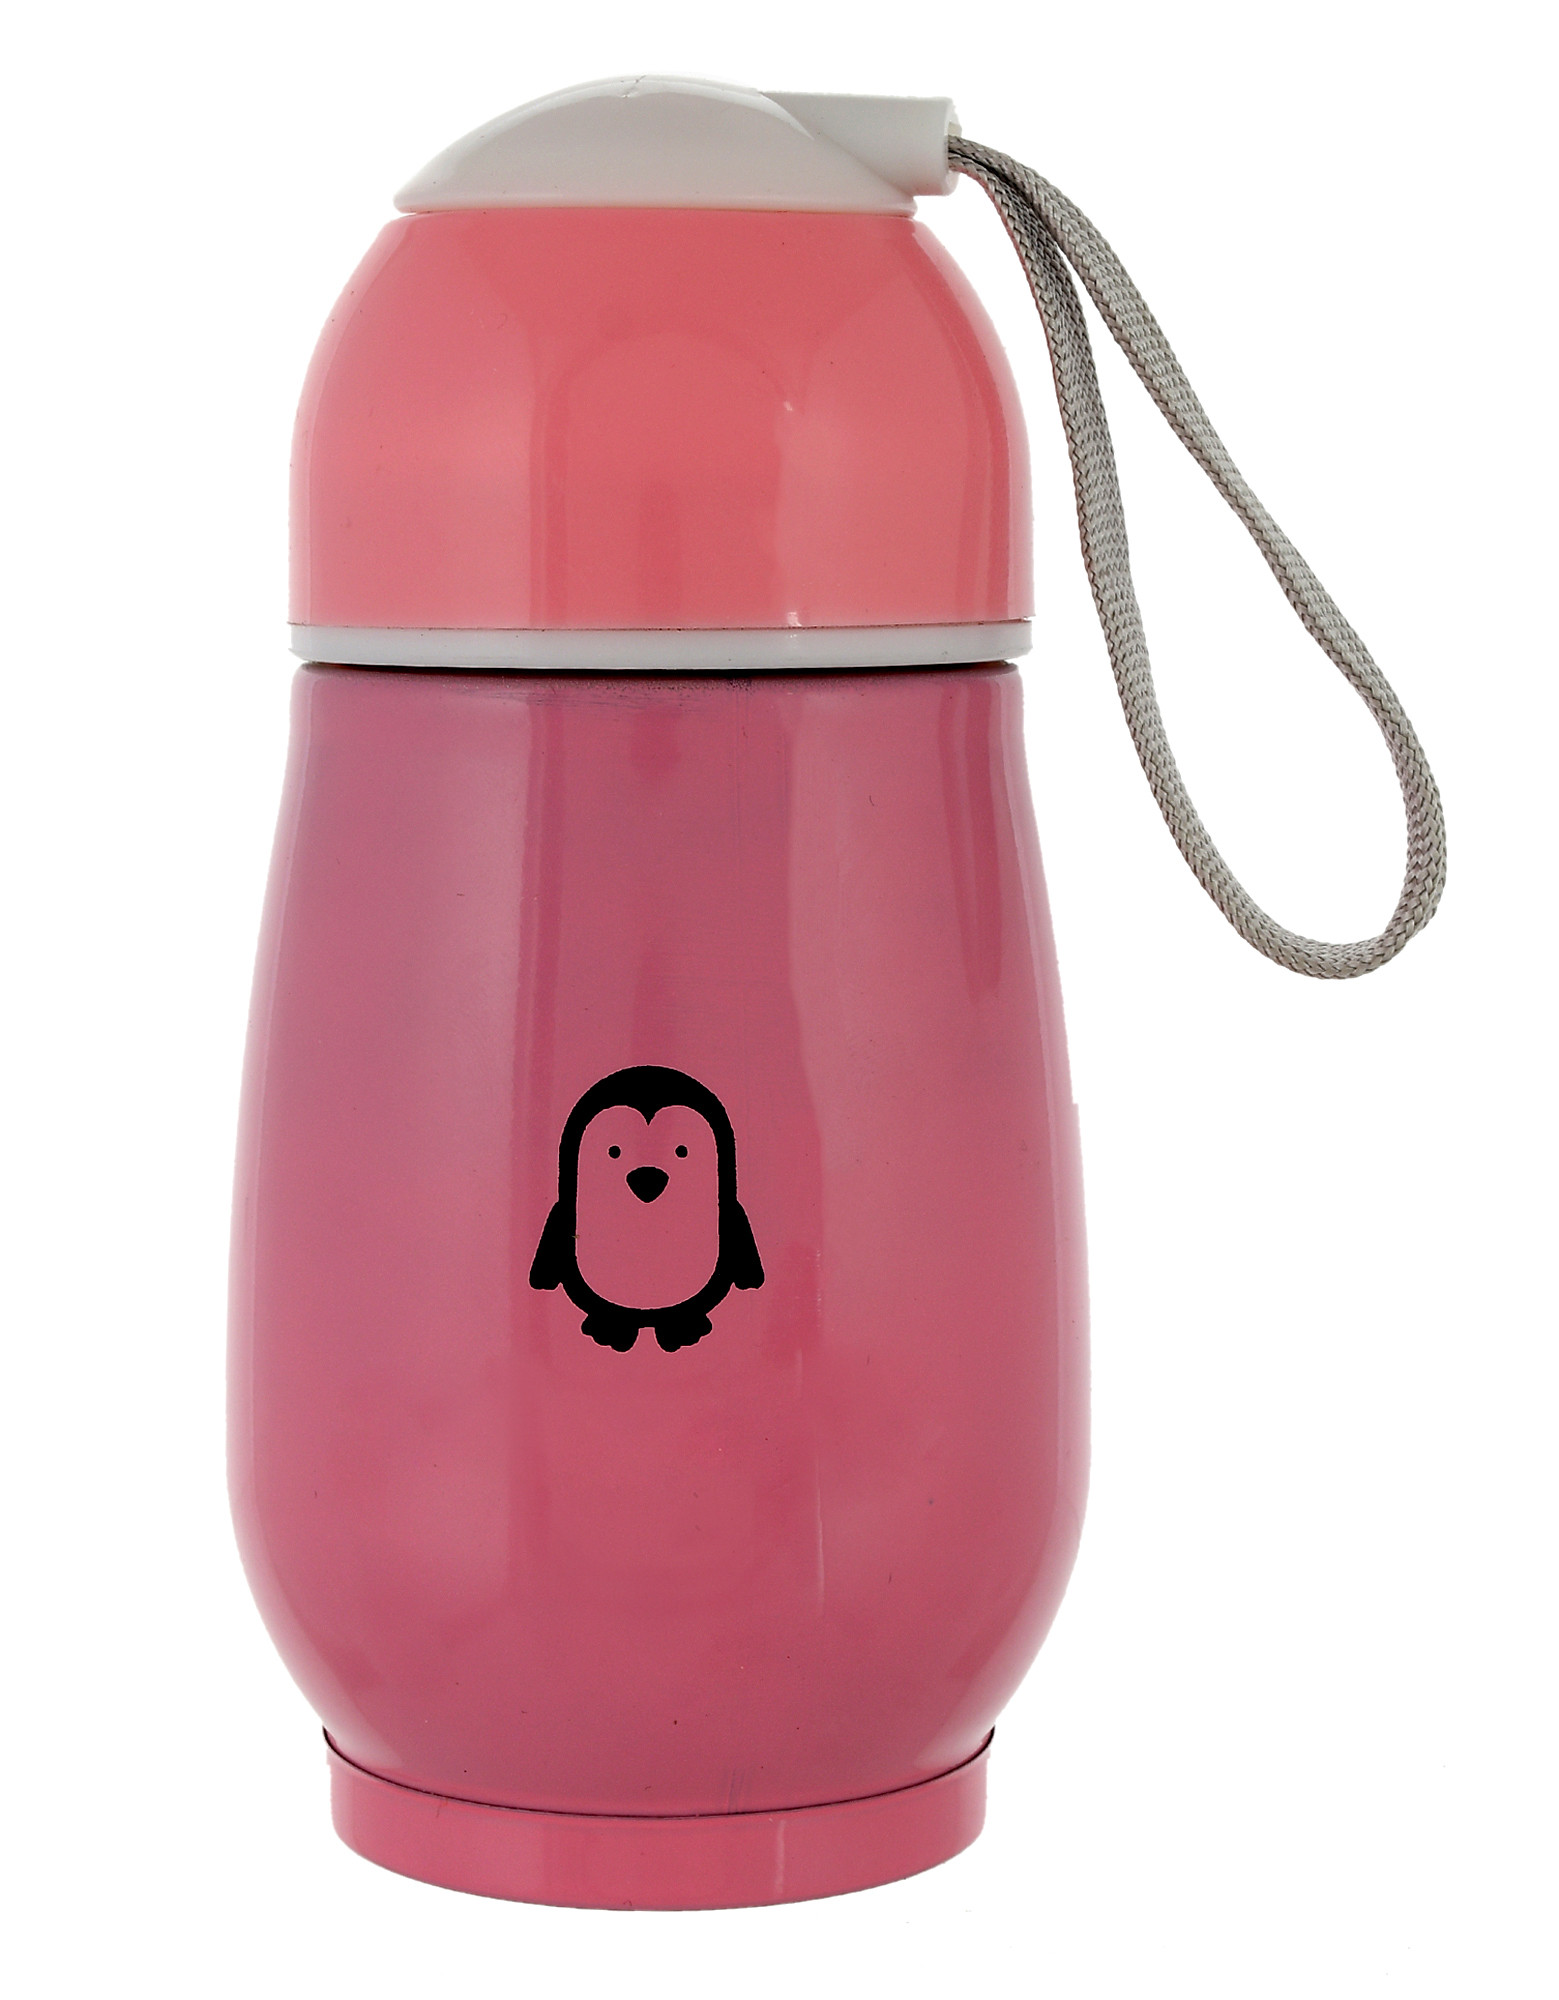 Kuber Industries Small Stainless Steel Hot & Cold Vacuum Thermos Travel Mug Tea Water Bottle Coffee Flask, 300ml (Pink)